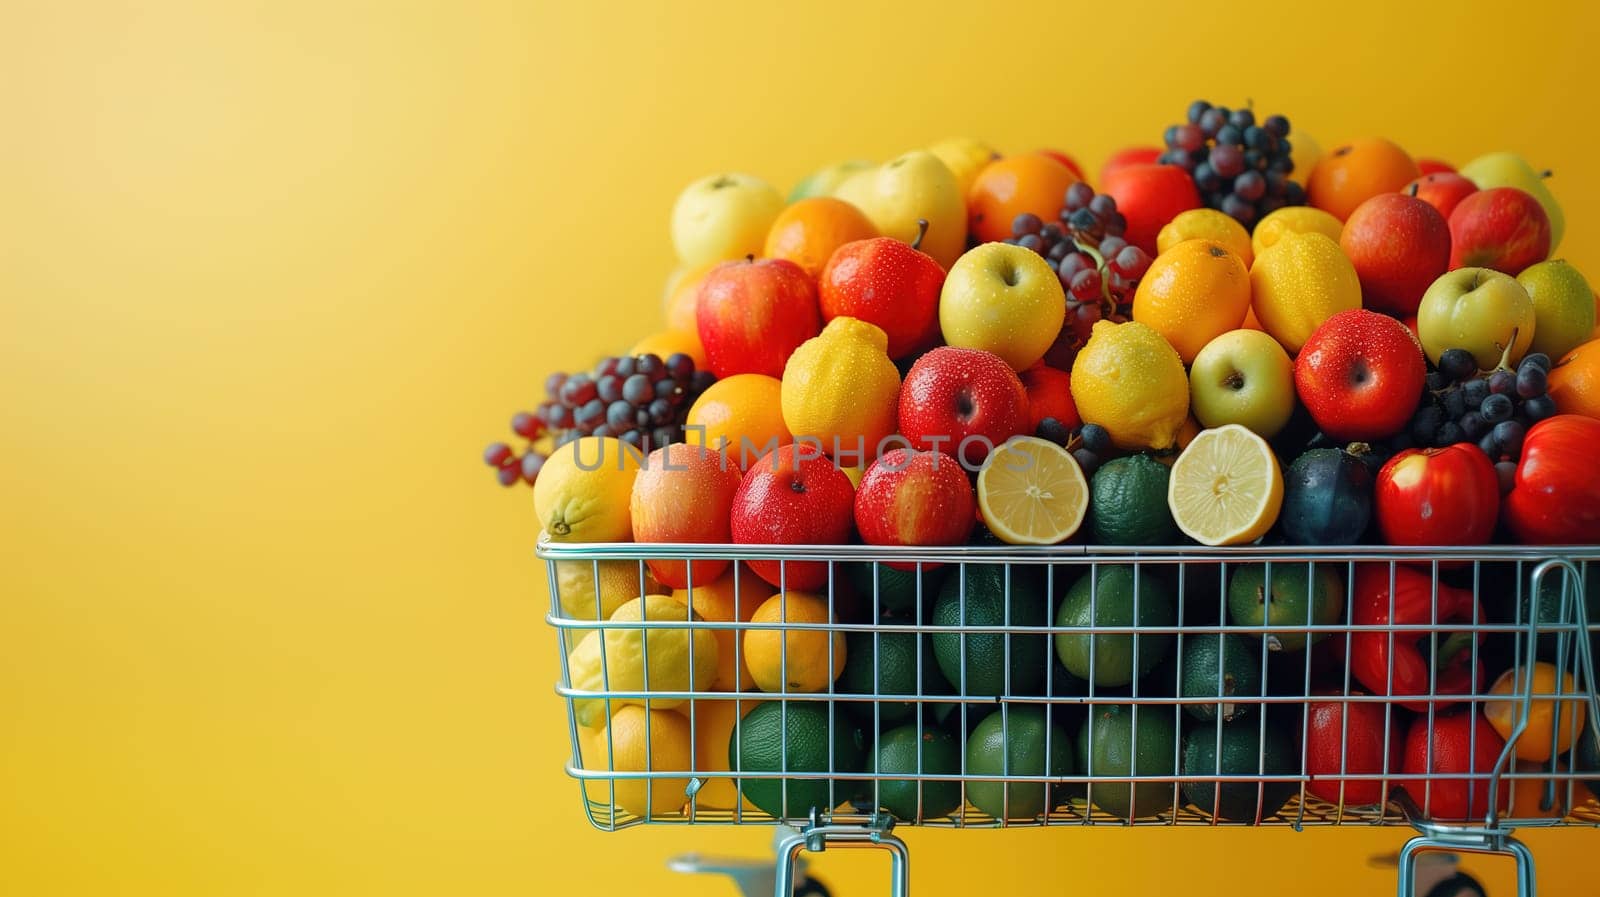 A shopping cart is fully loaded with an assortment of vibrant fruits, including apples, oranges, bananas, berries, and more. The cart is packed to the brim with colorful and nutritious produce.